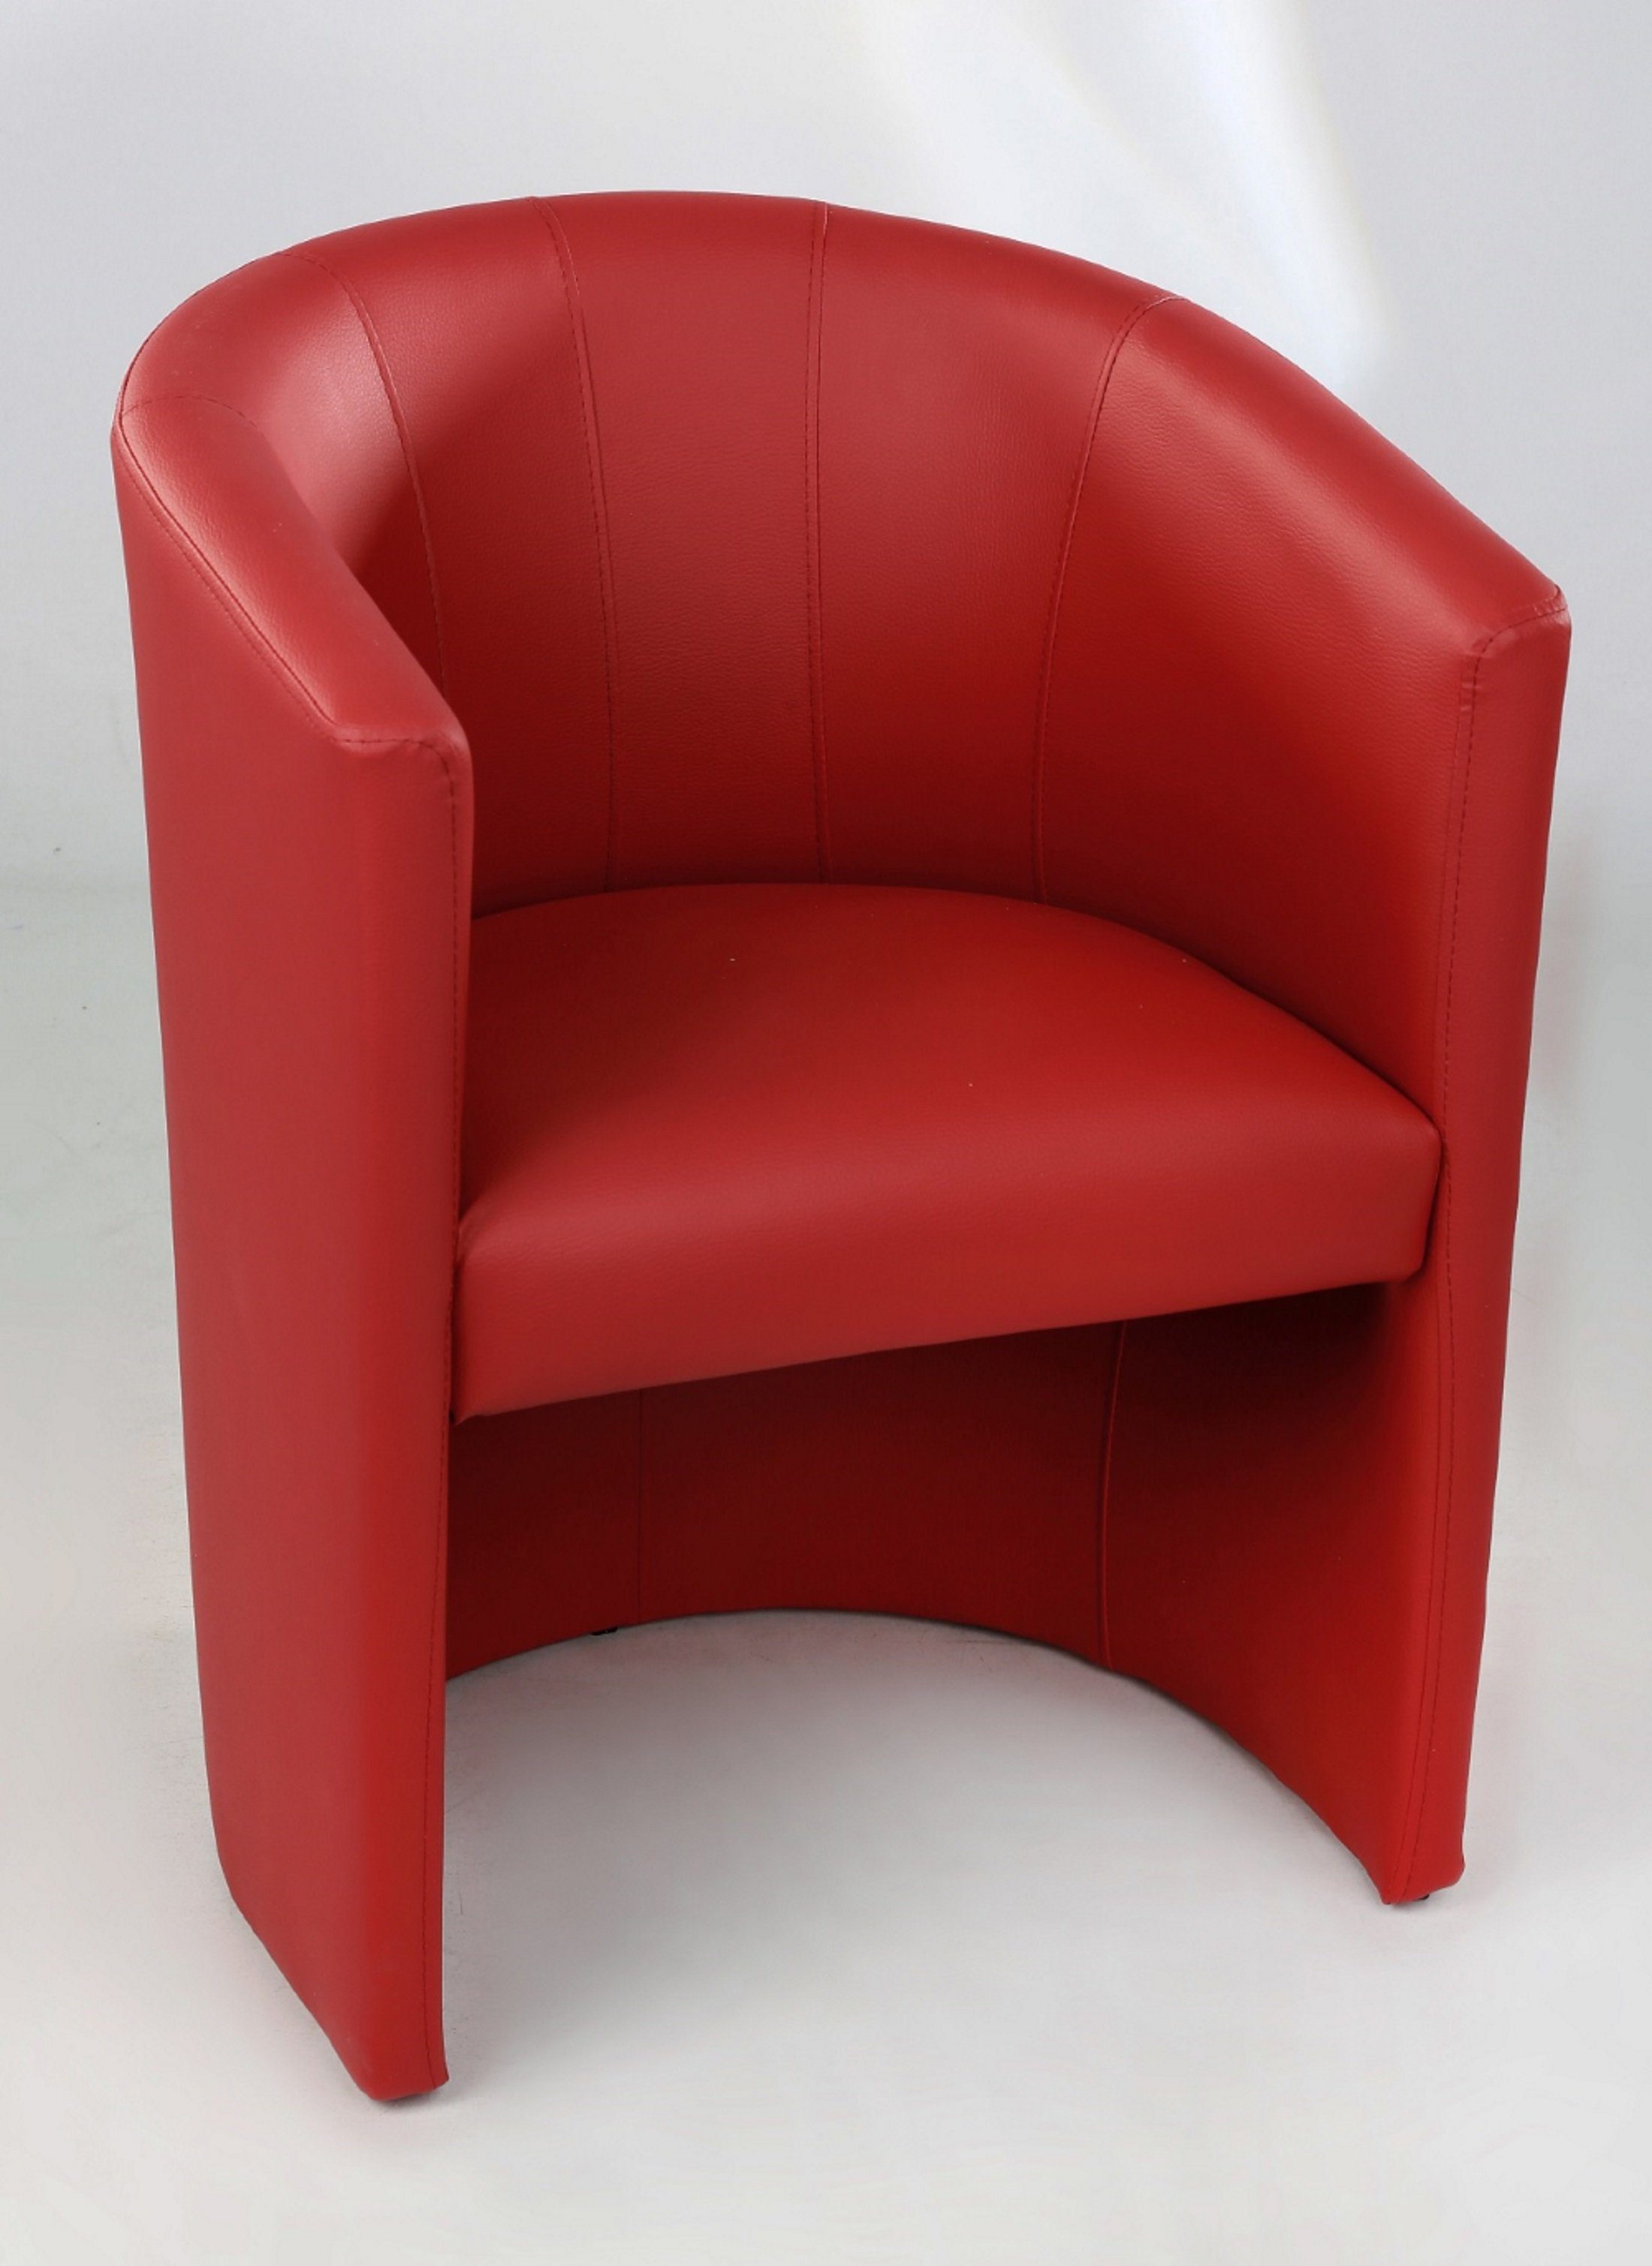 Kamil Cocktailsessel Farbe Rot Design Möbel Club Sessel Loungesessel Clubsessel